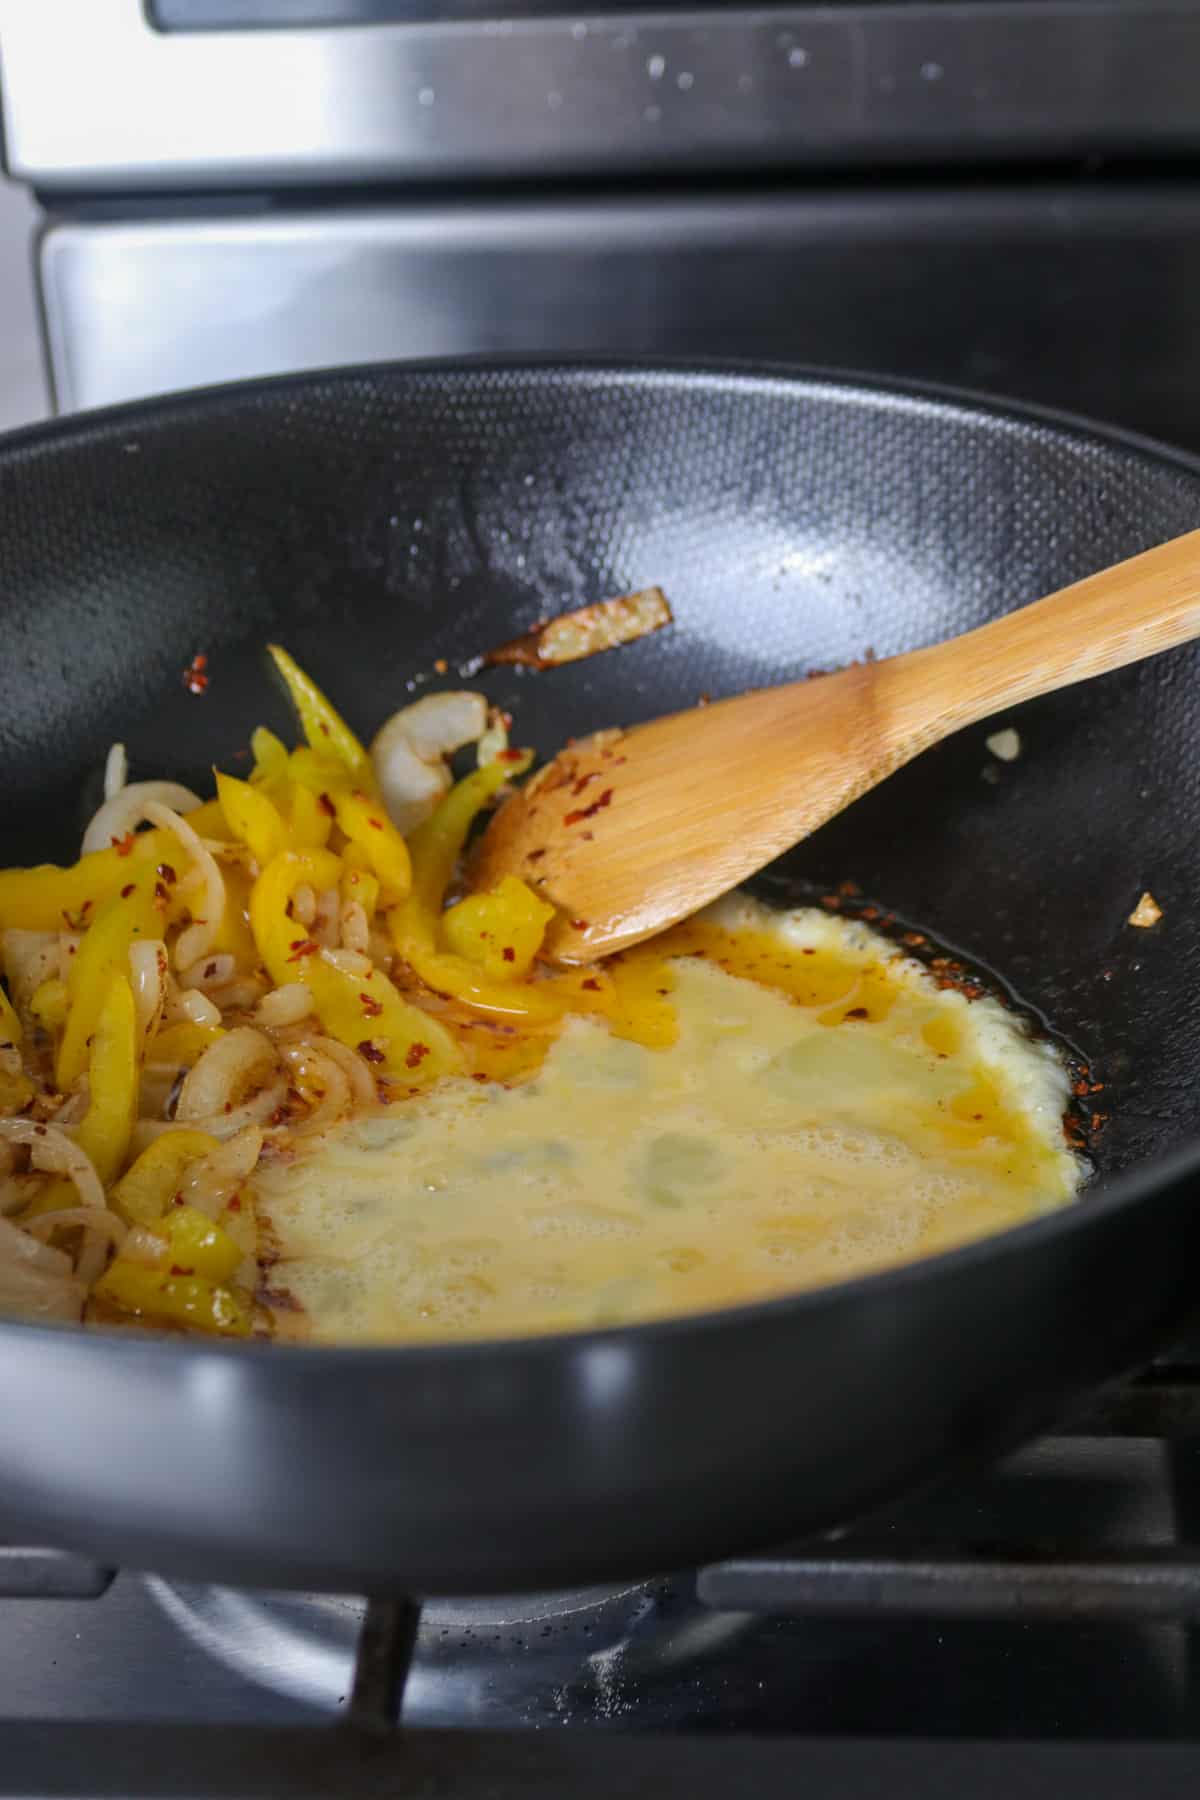 Cooking the eggs in the stir fry.